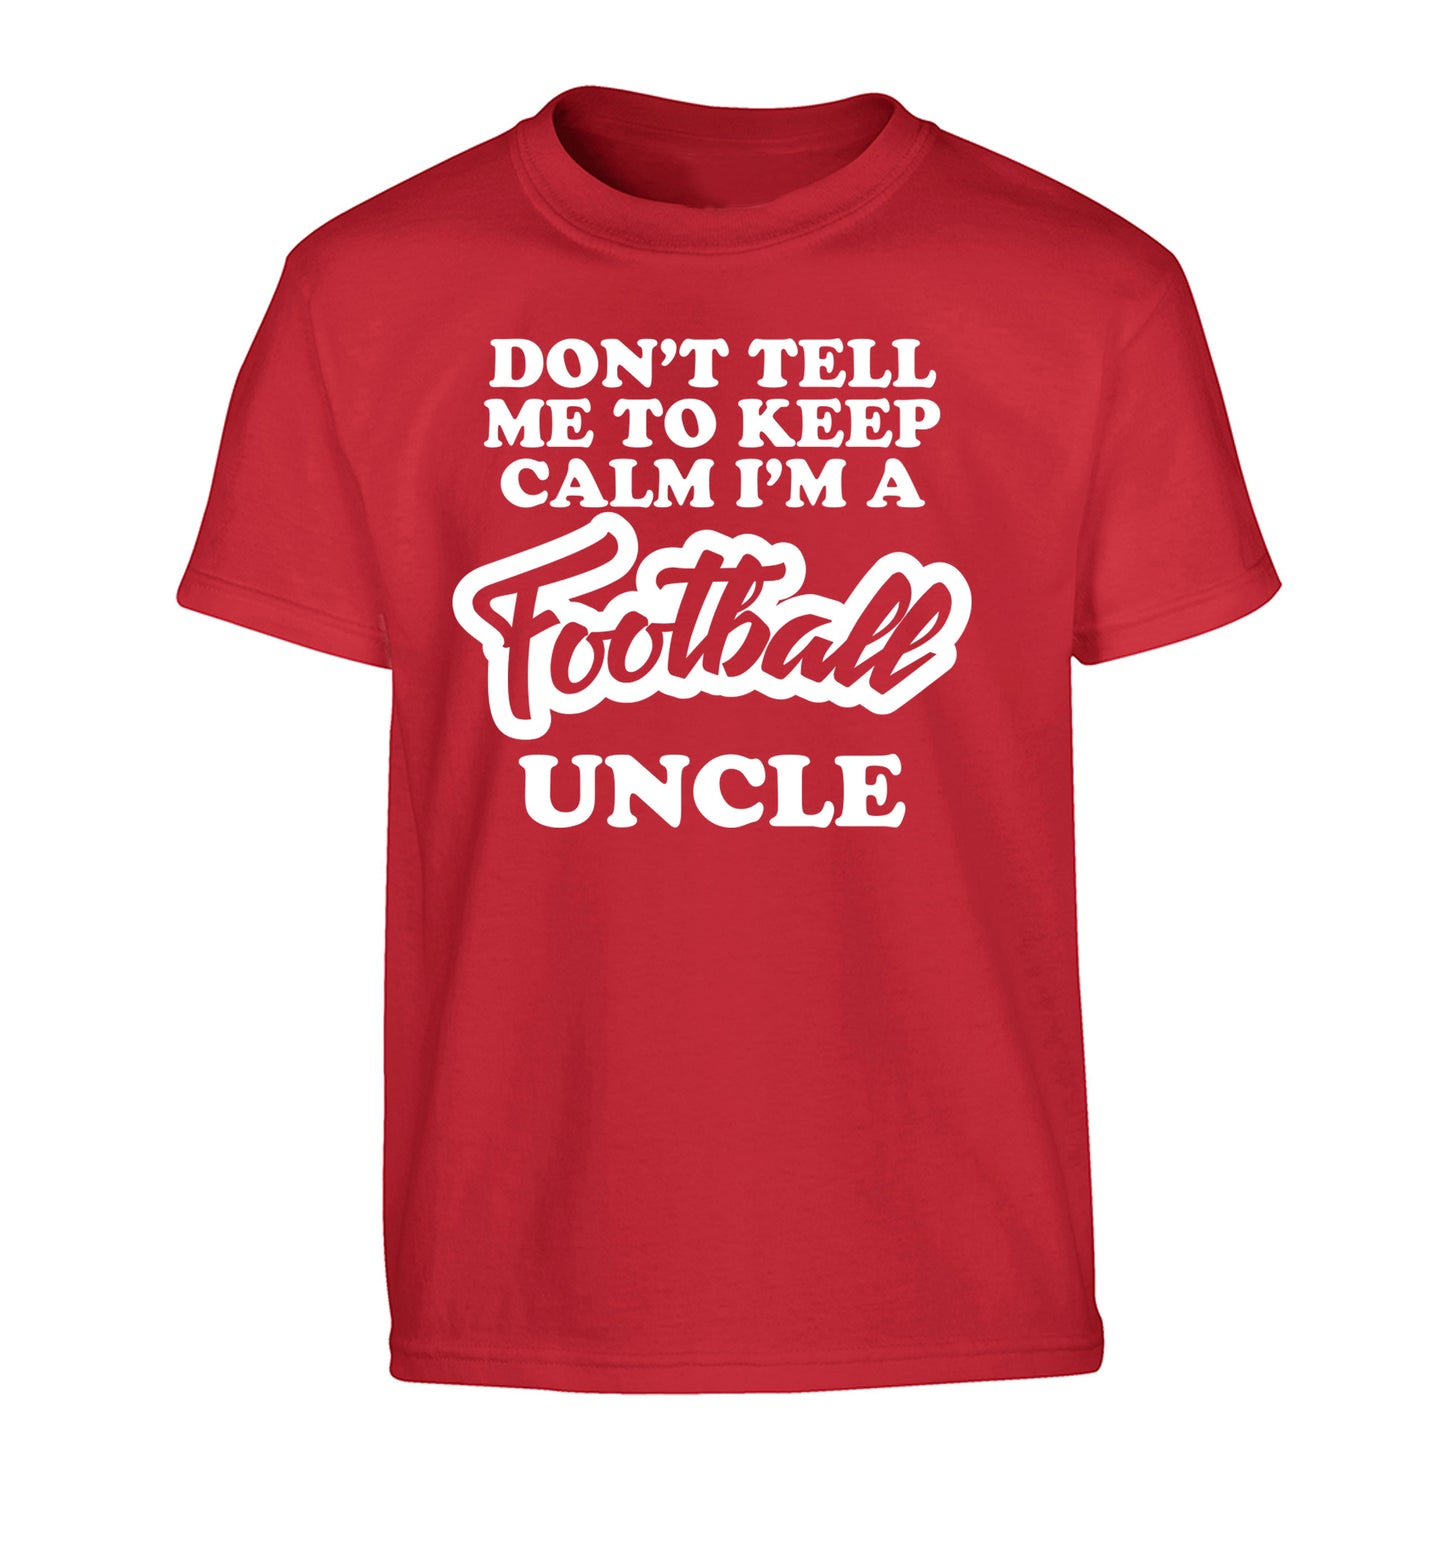 Worlds most amazing football uncle Children's red Tshirt 12-14 Years